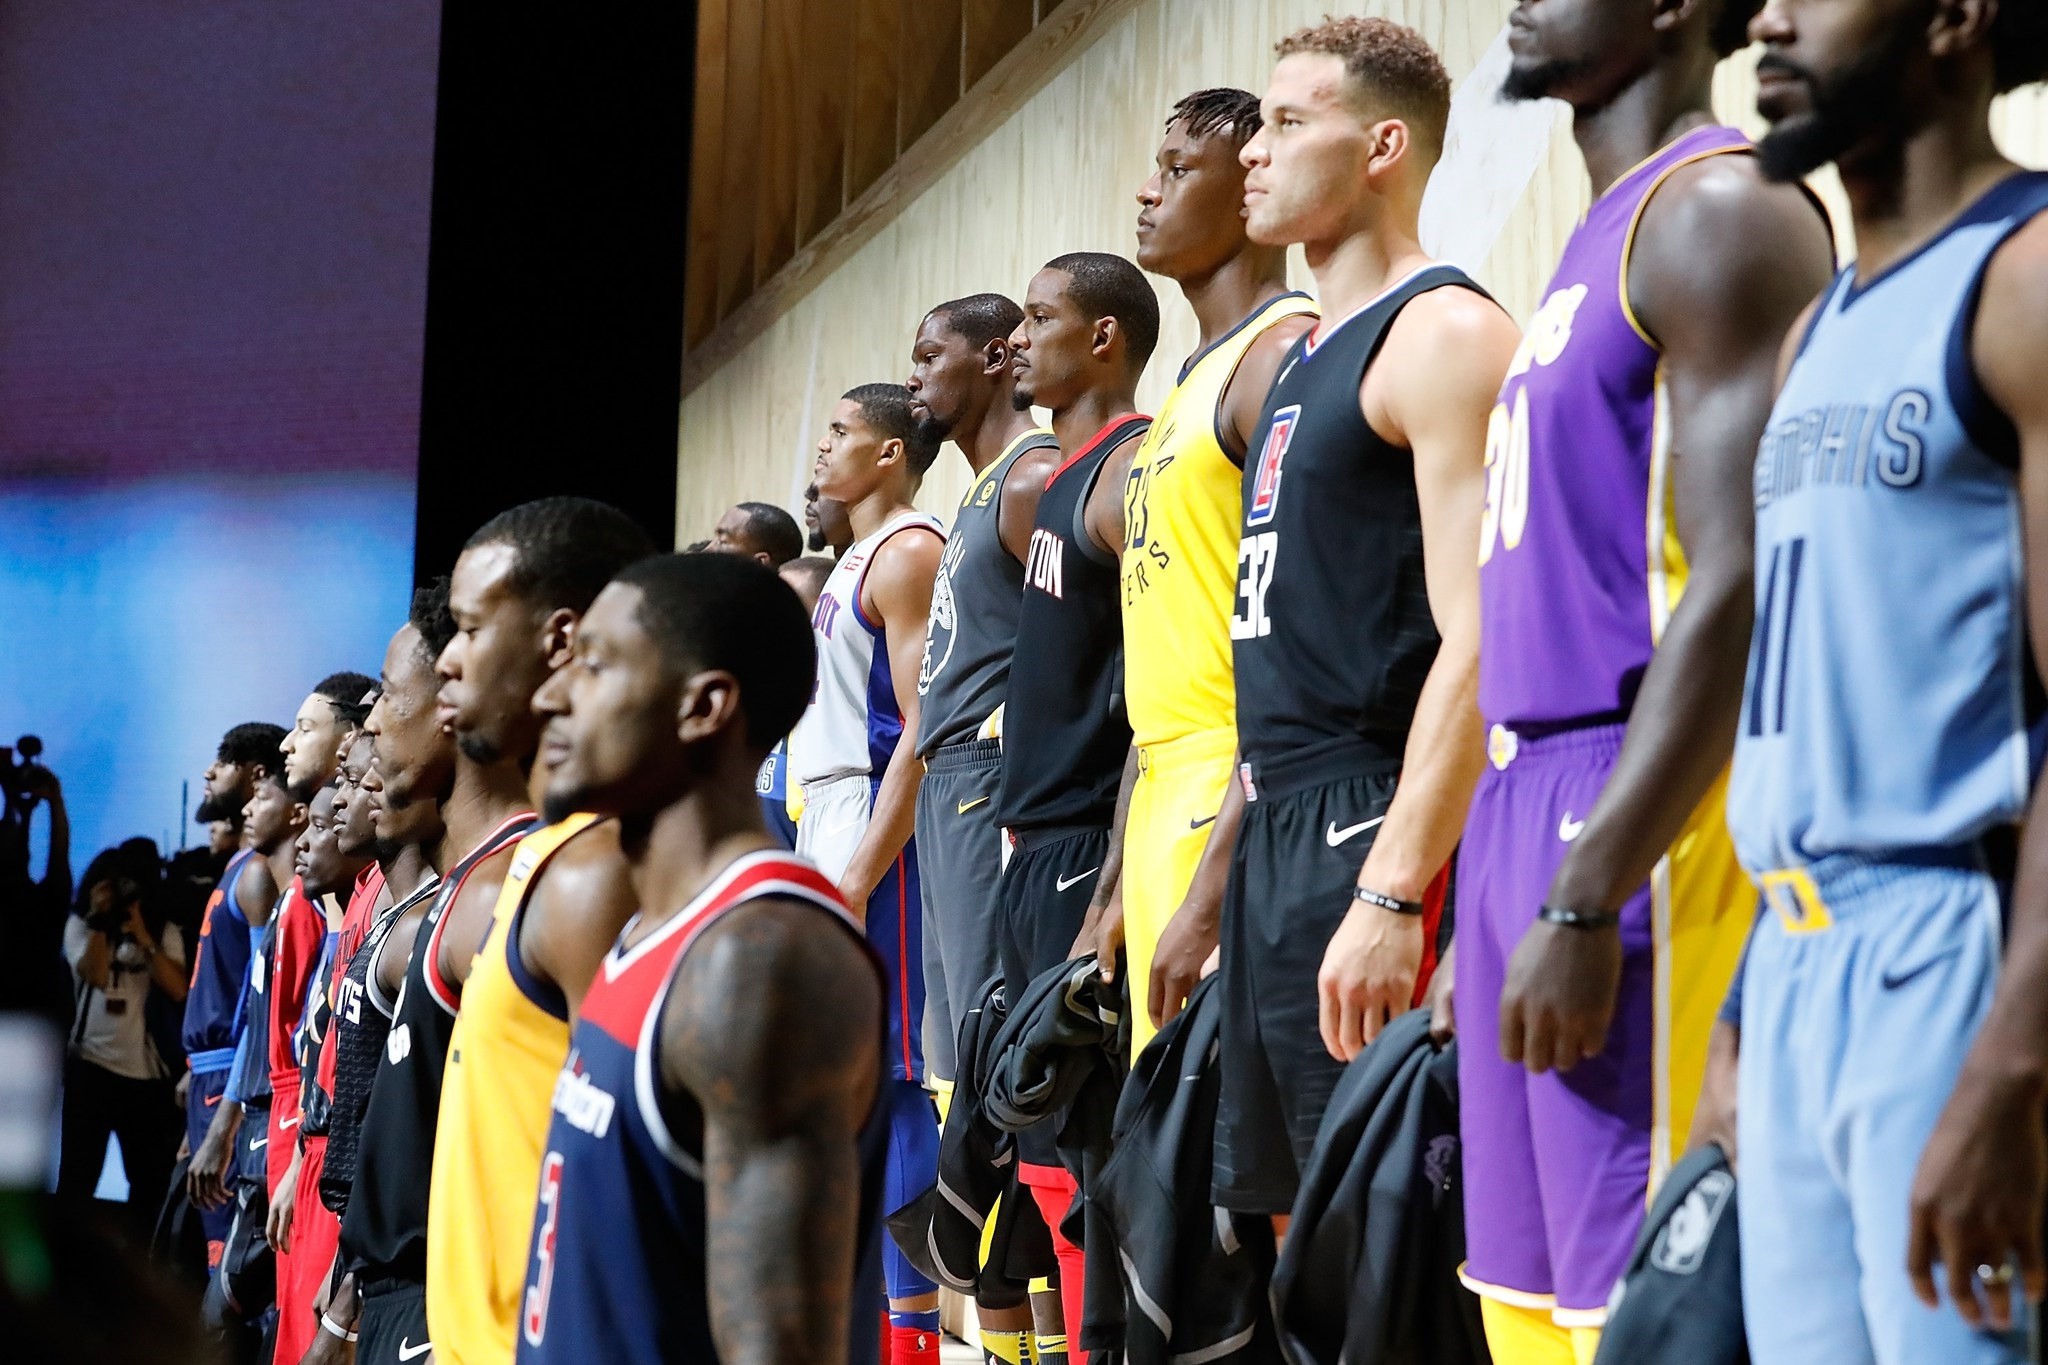 Nike unveils the new jerseys during the unveiling of the New NBA Partnership with Nike in Los Angeles.